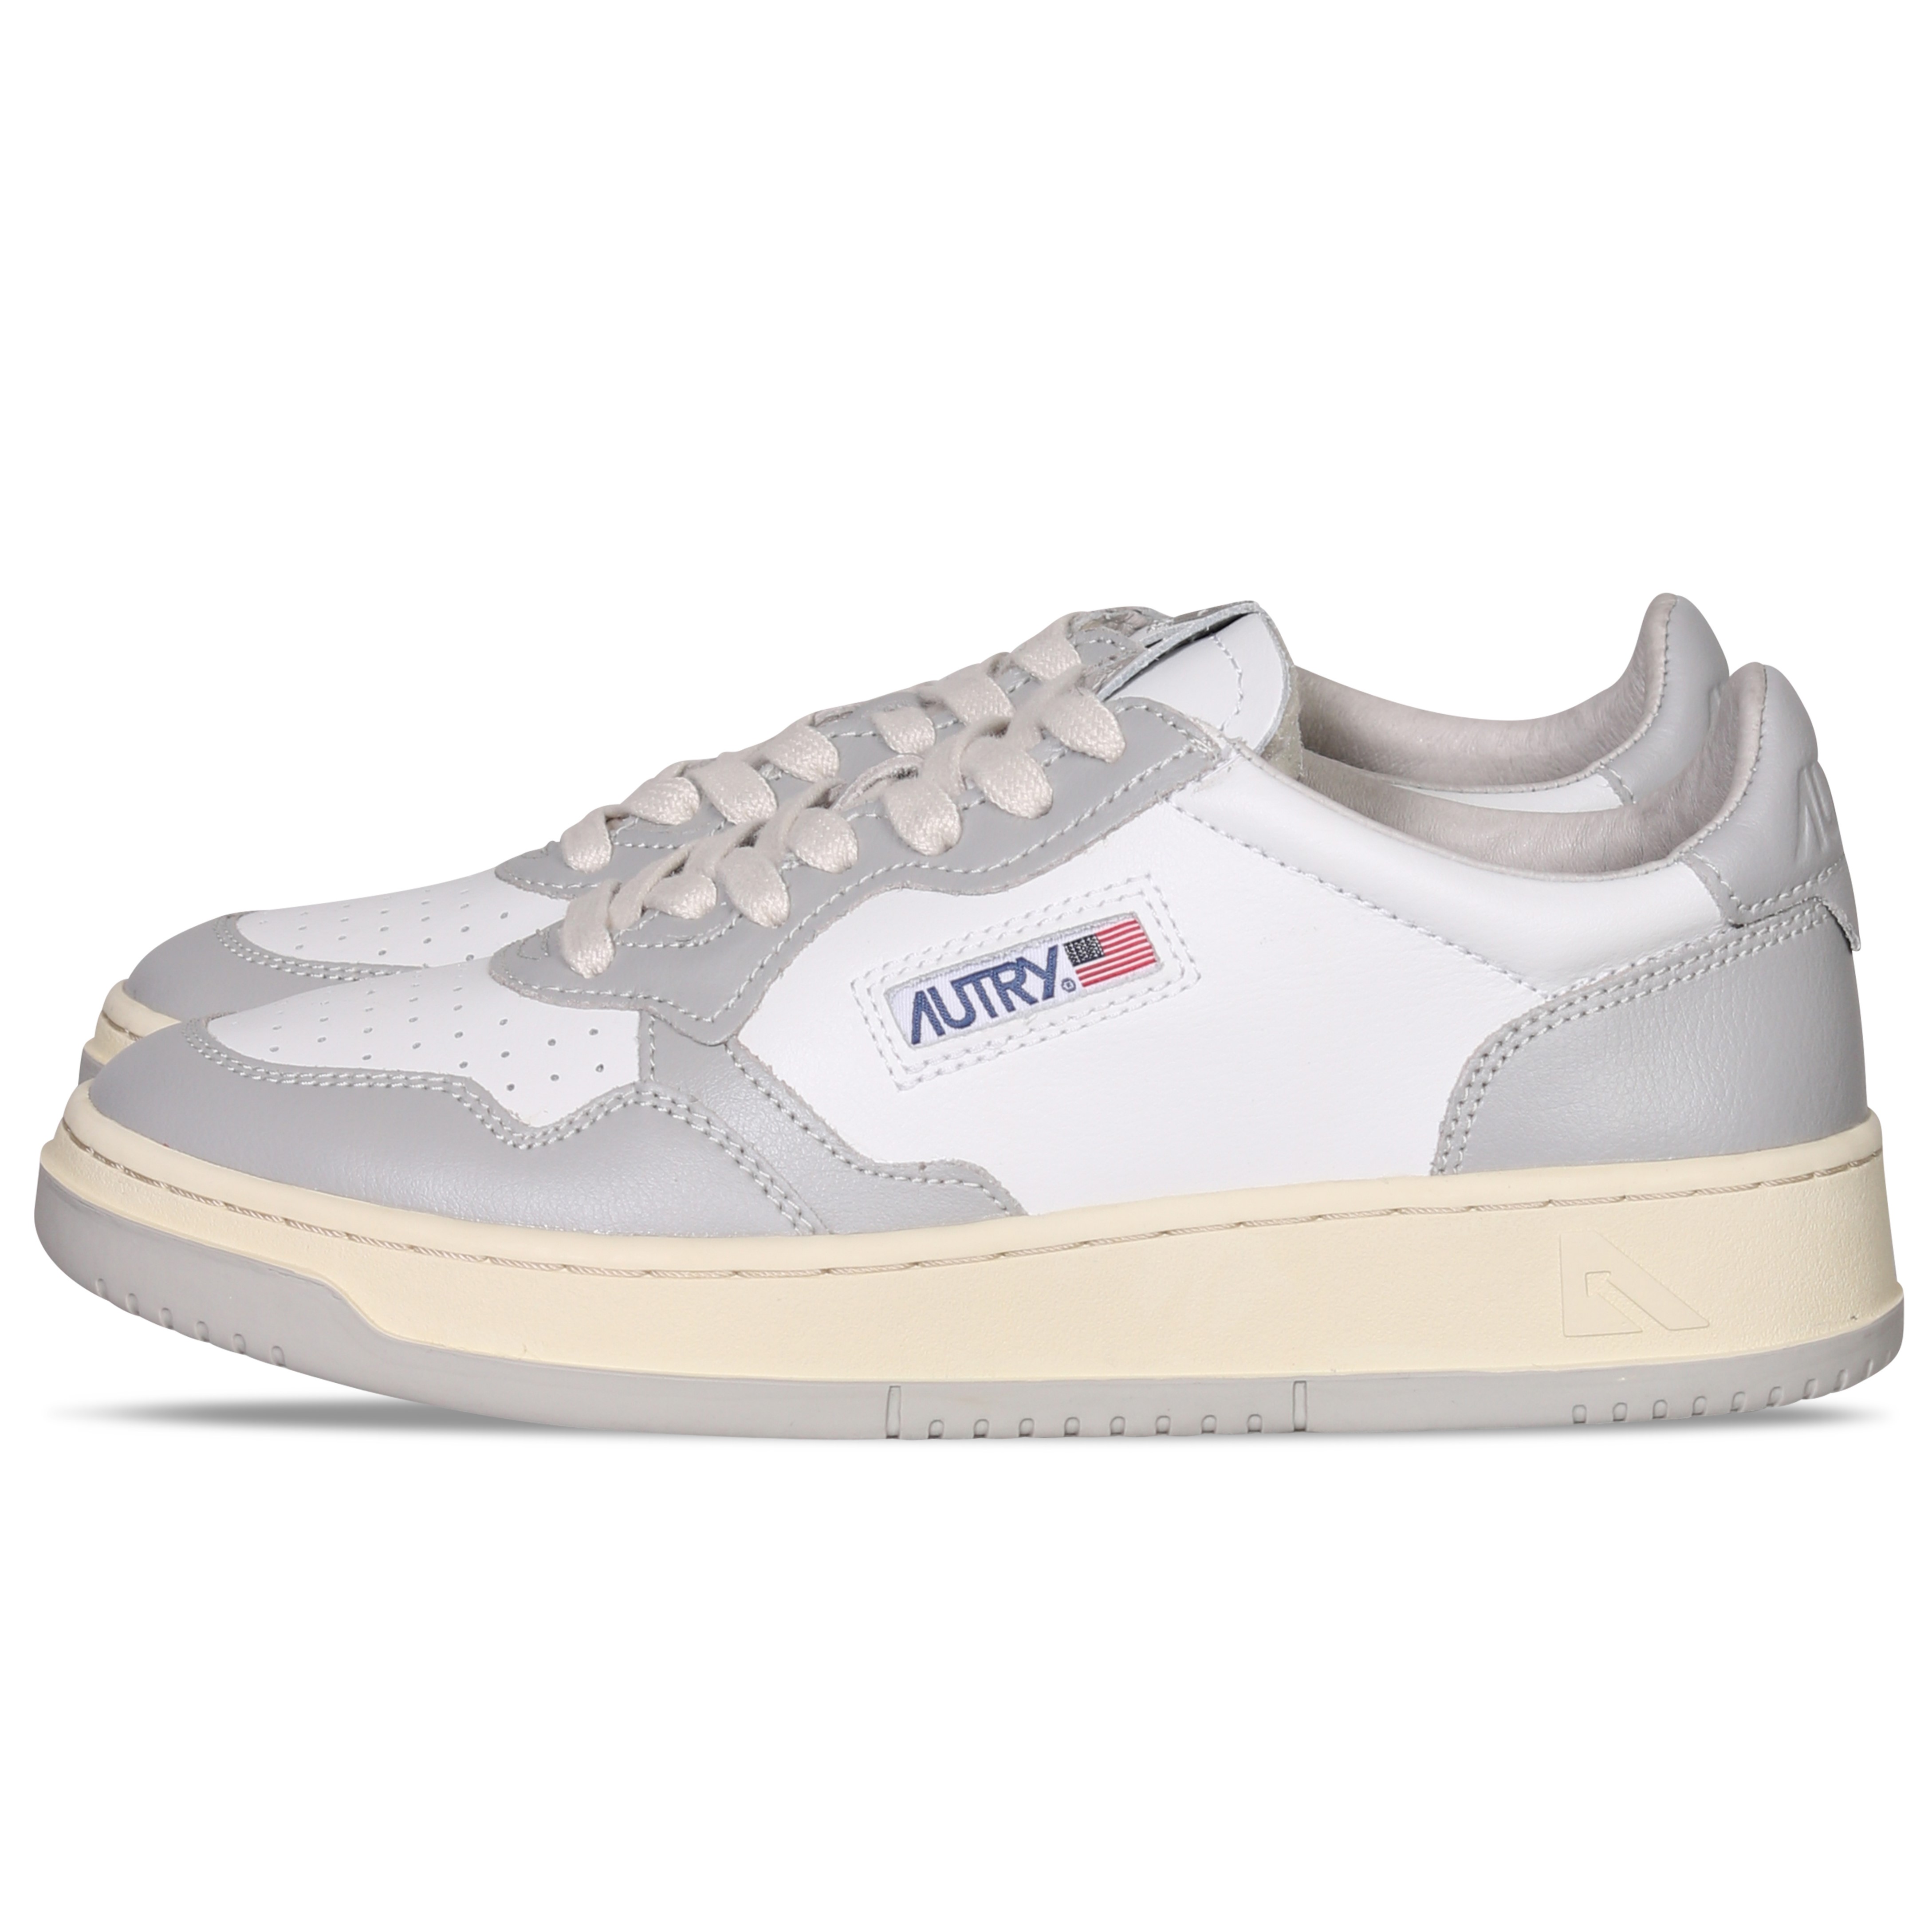 AUTRY ACTION SHOES Low Sneaker White/Grey